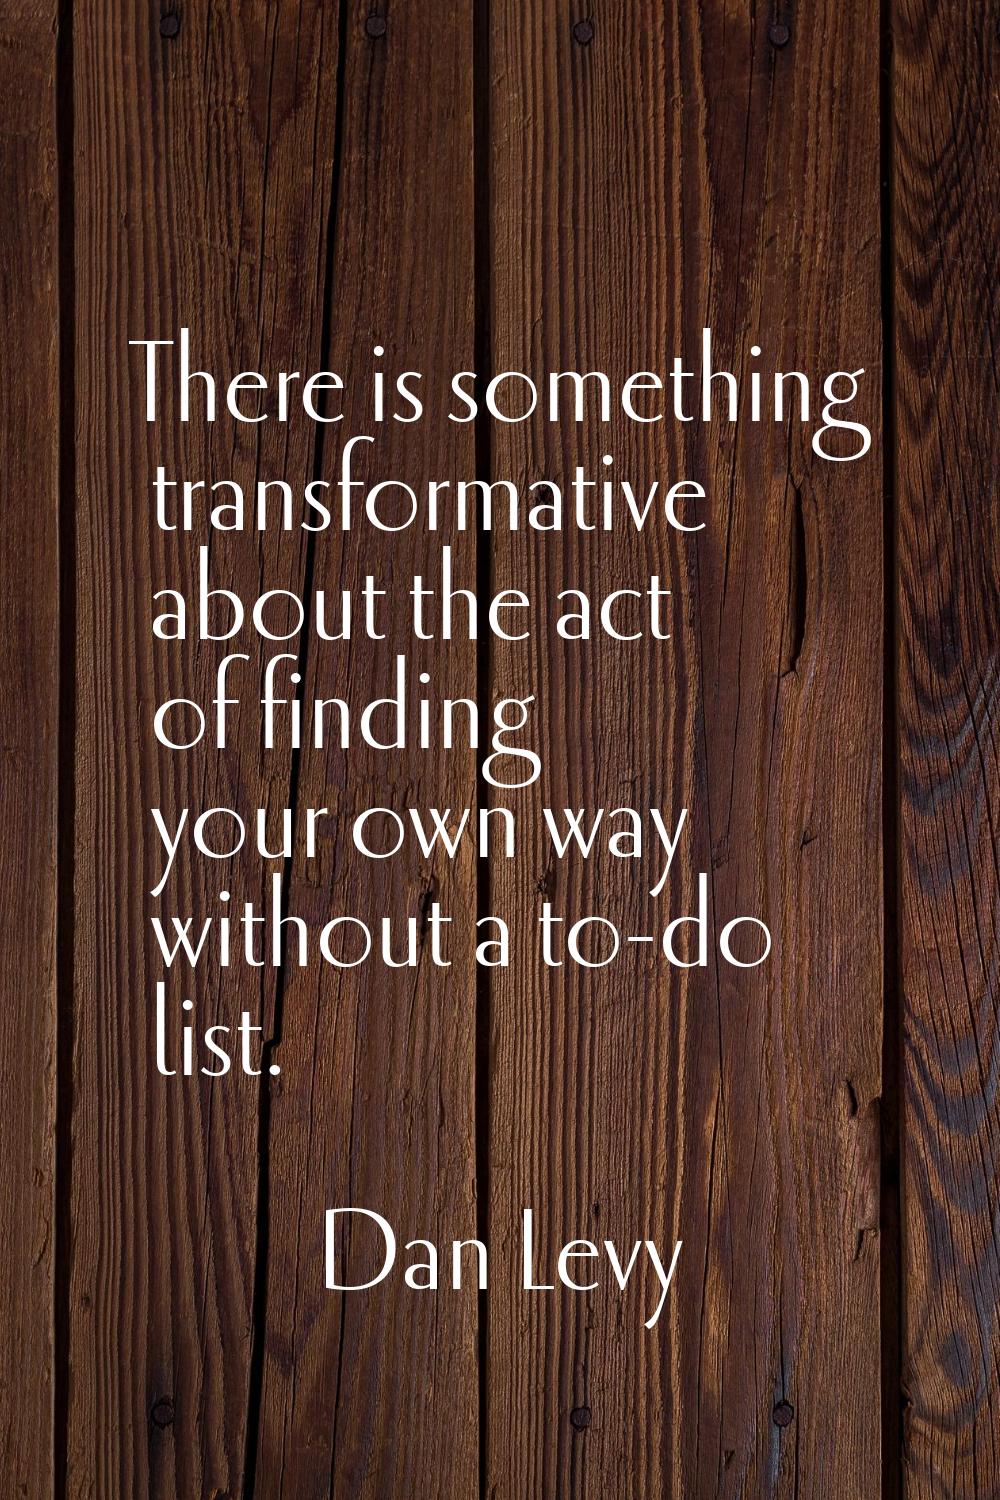 There is something transformative about the act of finding your own way without a to-do list.